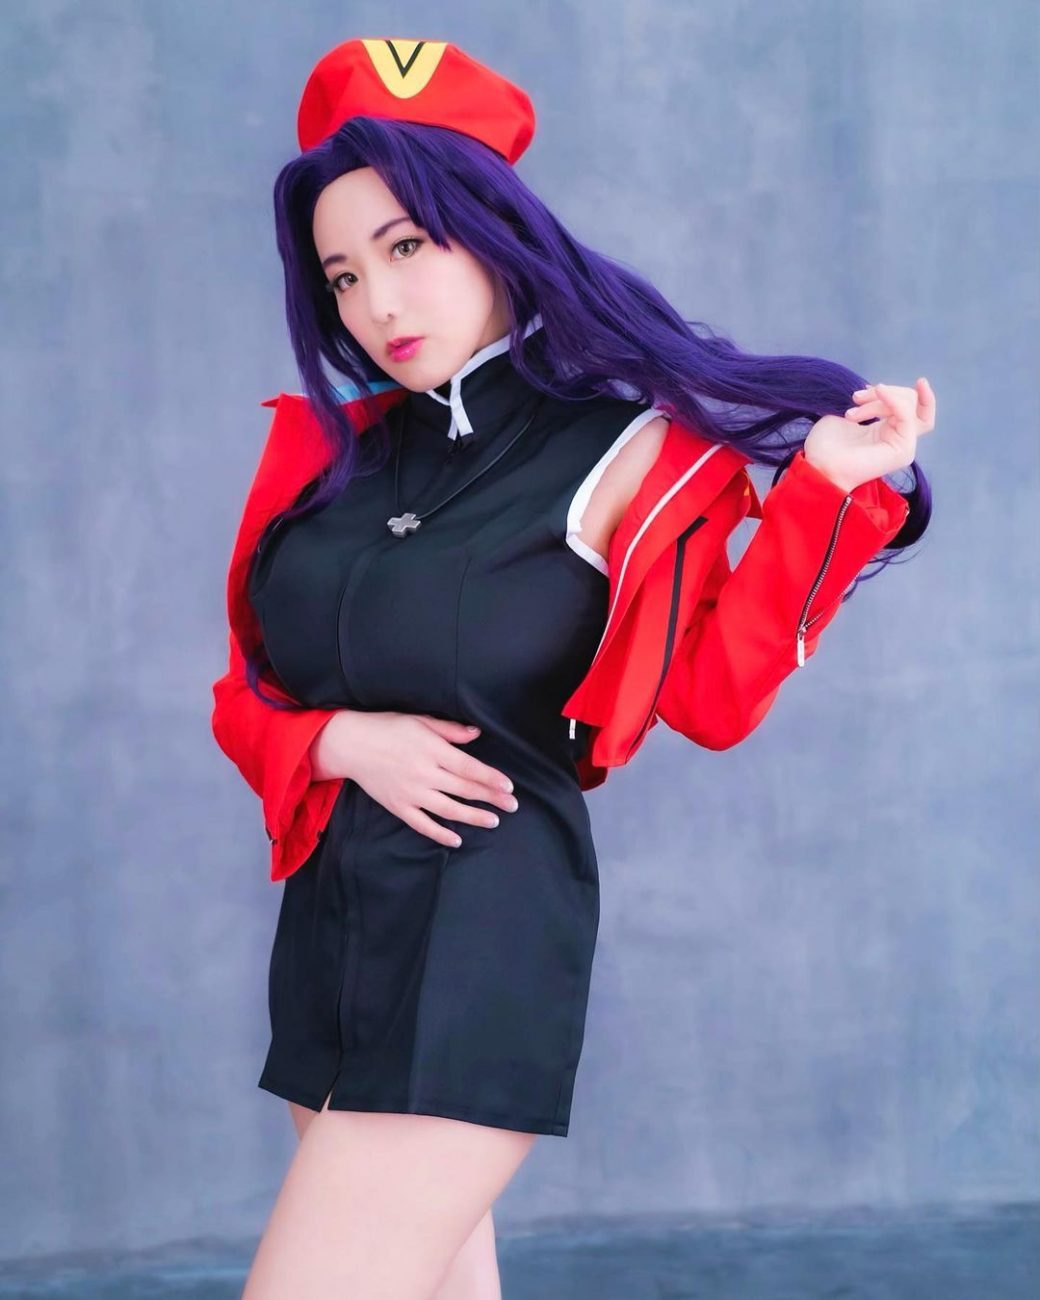 shibukaho Growing up Misato became from the least relatable character to the one I can identify the most with. evangelion 2021 07 29T20 04 19.000Z 2 scaled